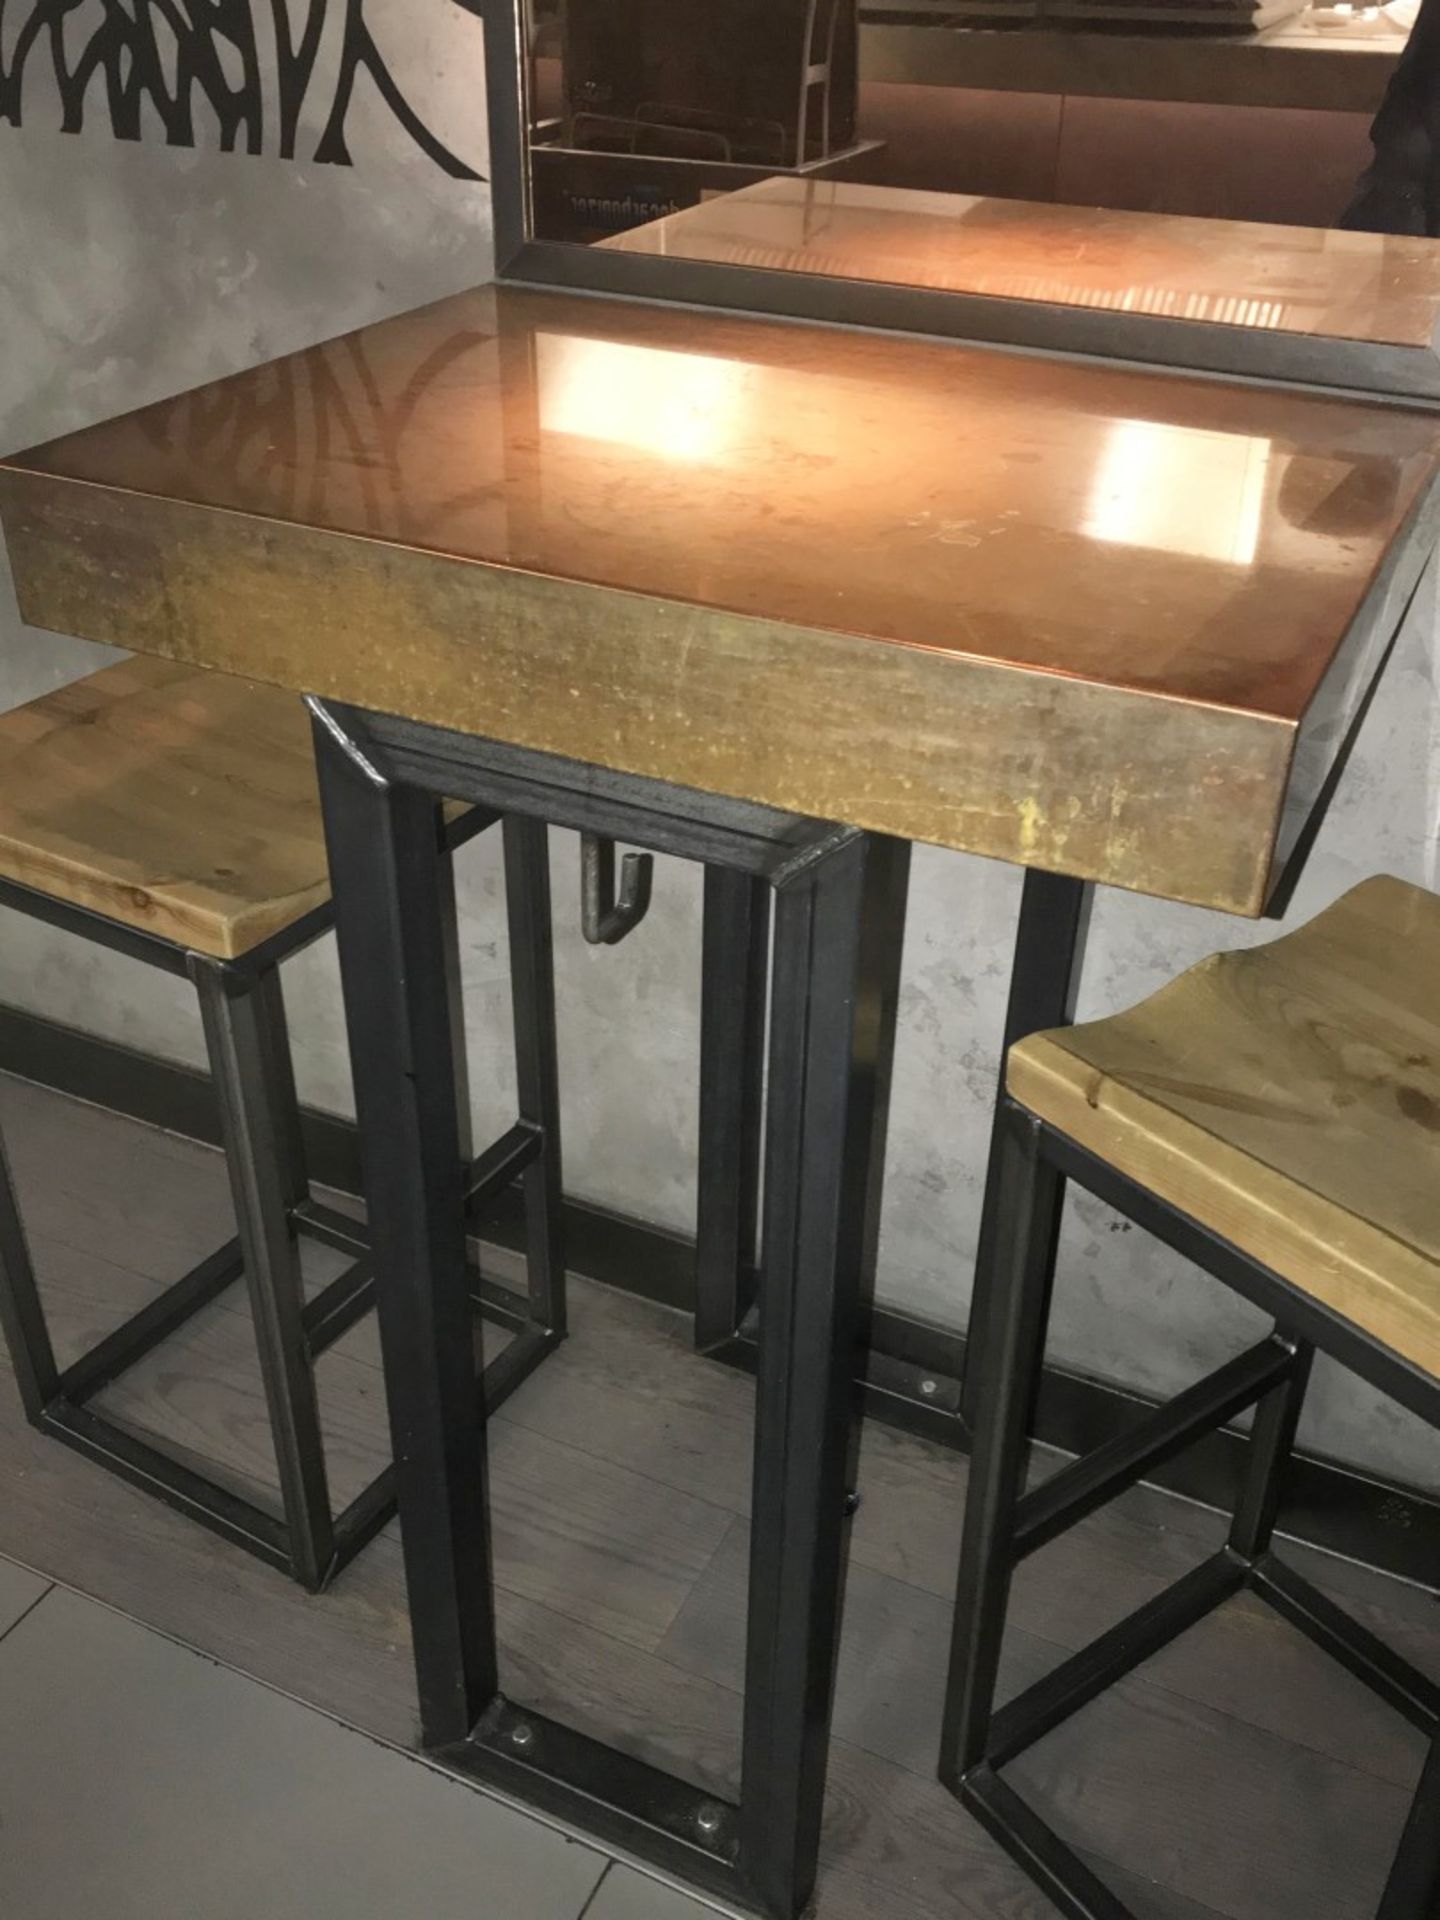 1 x Restaurant Poser Table With Industrail Metal Base and Copper Top - Size H110 x W60 x D75 cms - - Image 4 of 5